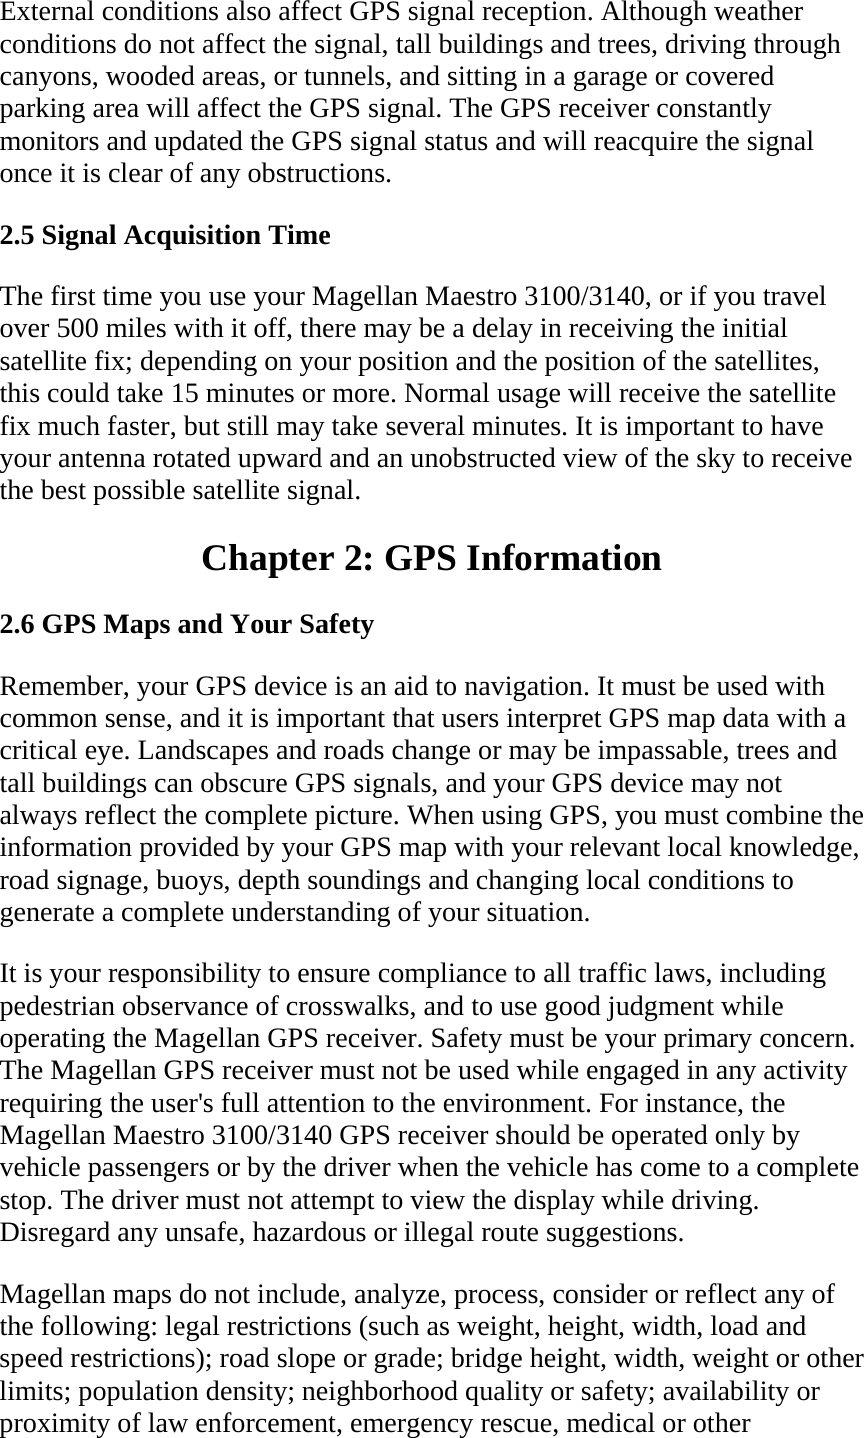 External conditions also affect GPS signal reception. Although weather conditions do not affect the signal, tall buildings and trees, driving through canyons, wooded areas, or tunnels, and sitting in a garage or covered parking area will affect the GPS signal. The GPS receiver constantly monitors and updated the GPS signal status and will reacquire the signal once it is clear of any obstructions.  2.5 Signal Acquisition Time  The first time you use your Magellan Maestro 3100/3140, or if you travel over 500 miles with it off, there may be a delay in receiving the initial satellite fix; depending on your position and the position of the satellites, this could take 15 minutes or more. Normal usage will receive the satellite fix much faster, but still may take several minutes. It is important to have your antenna rotated upward and an unobstructed view of the sky to receive the best possible satellite signal.  Chapter 2: GPS Information  2.6 GPS Maps and Your Safety  Remember, your GPS device is an aid to navigation. It must be used with common sense, and it is important that users interpret GPS map data with a critical eye. Landscapes and roads change or may be impassable, trees and tall buildings can obscure GPS signals, and your GPS device may not always reflect the complete picture. When using GPS, you must combine the information provided by your GPS map with your relevant local knowledge, road signage, buoys, depth soundings and changing local conditions to generate a complete understanding of your situation.  It is your responsibility to ensure compliance to all traffic laws, including pedestrian observance of crosswalks, and to use good judgment while operating the Magellan GPS receiver. Safety must be your primary concern. The Magellan GPS receiver must not be used while engaged in any activity requiring the user&apos;s full attention to the environment. For instance, the Magellan Maestro 3100/3140 GPS receiver should be operated only by vehicle passengers or by the driver when the vehicle has come to a complete stop. The driver must not attempt to view the display while driving. Disregard any unsafe, hazardous or illegal route suggestions.  Magellan maps do not include, analyze, process, consider or reflect any of the following: legal restrictions (such as weight, height, width, load and speed restrictions); road slope or grade; bridge height, width, weight or other limits; population density; neighborhood quality or safety; availability or proximity of law enforcement, emergency rescue, medical or other 